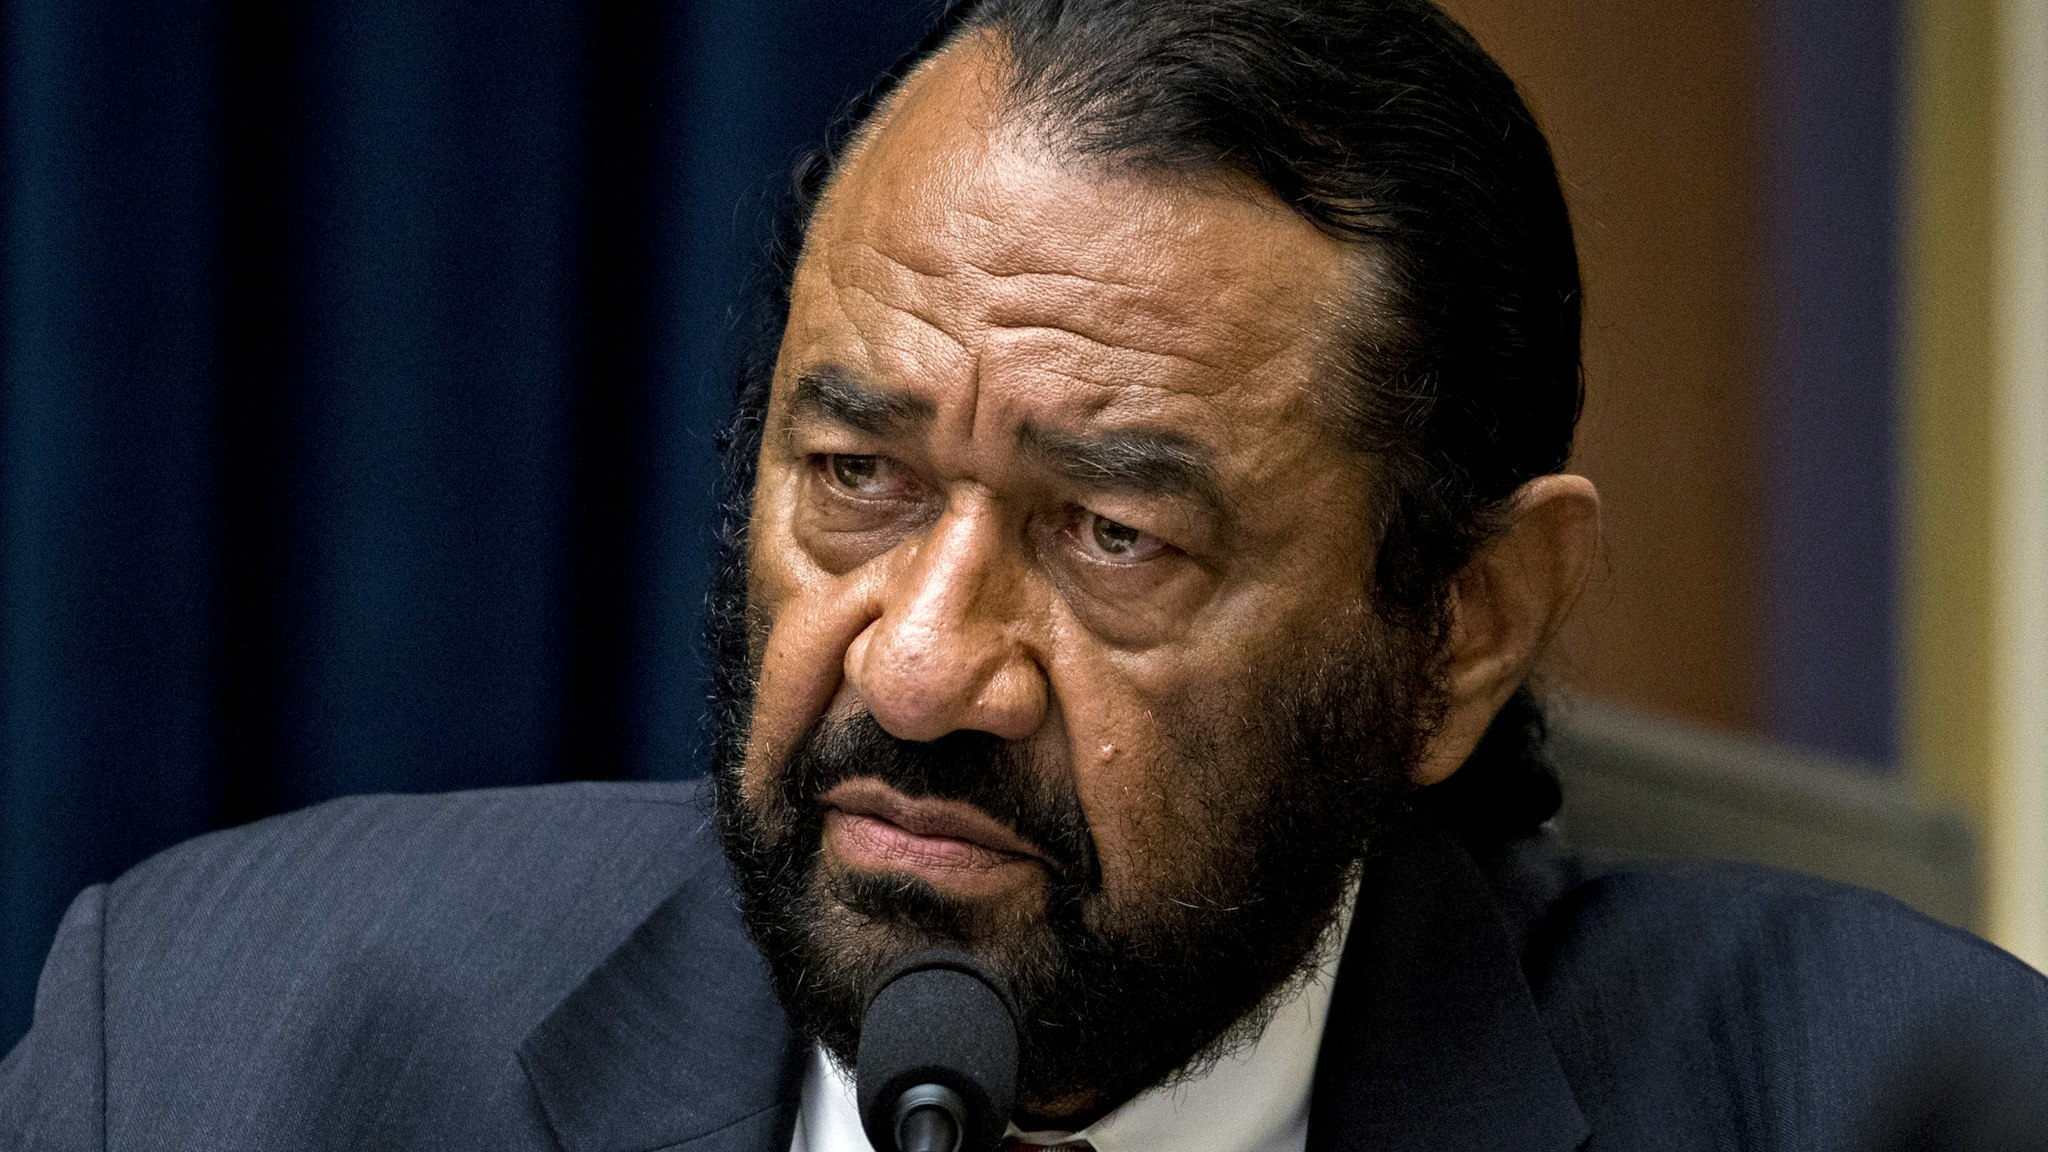 Representative Al Green, a Democrat from Texas, listens while questioning David Marcus, head of blockchain with Facebook Inc., not pictured, during a House Financial Services Committee hearing in Washington, D.C., U.S., on Wednesday, July 17, 2019. Republican and Democratic Senators sharply questioned Facebook Inc.'s plan to create its own digital money, adding to a chorus of skepticism across Washington and underscoring the challenges the company faces in getting its cryptocurrency off the ground.